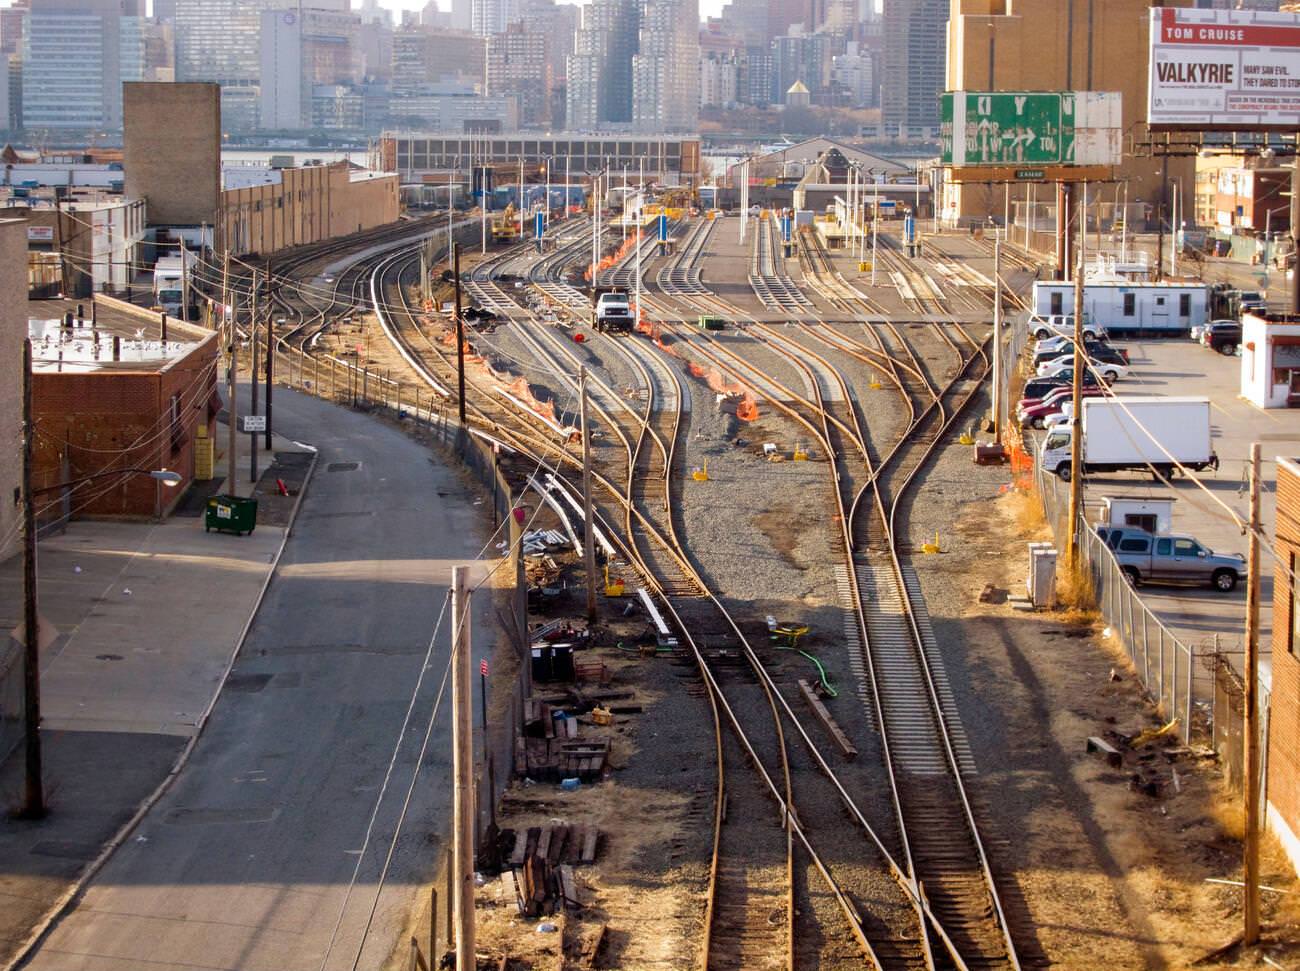 The Empty Long Island City Station On The Long Island Railroad, Queens, 2008.